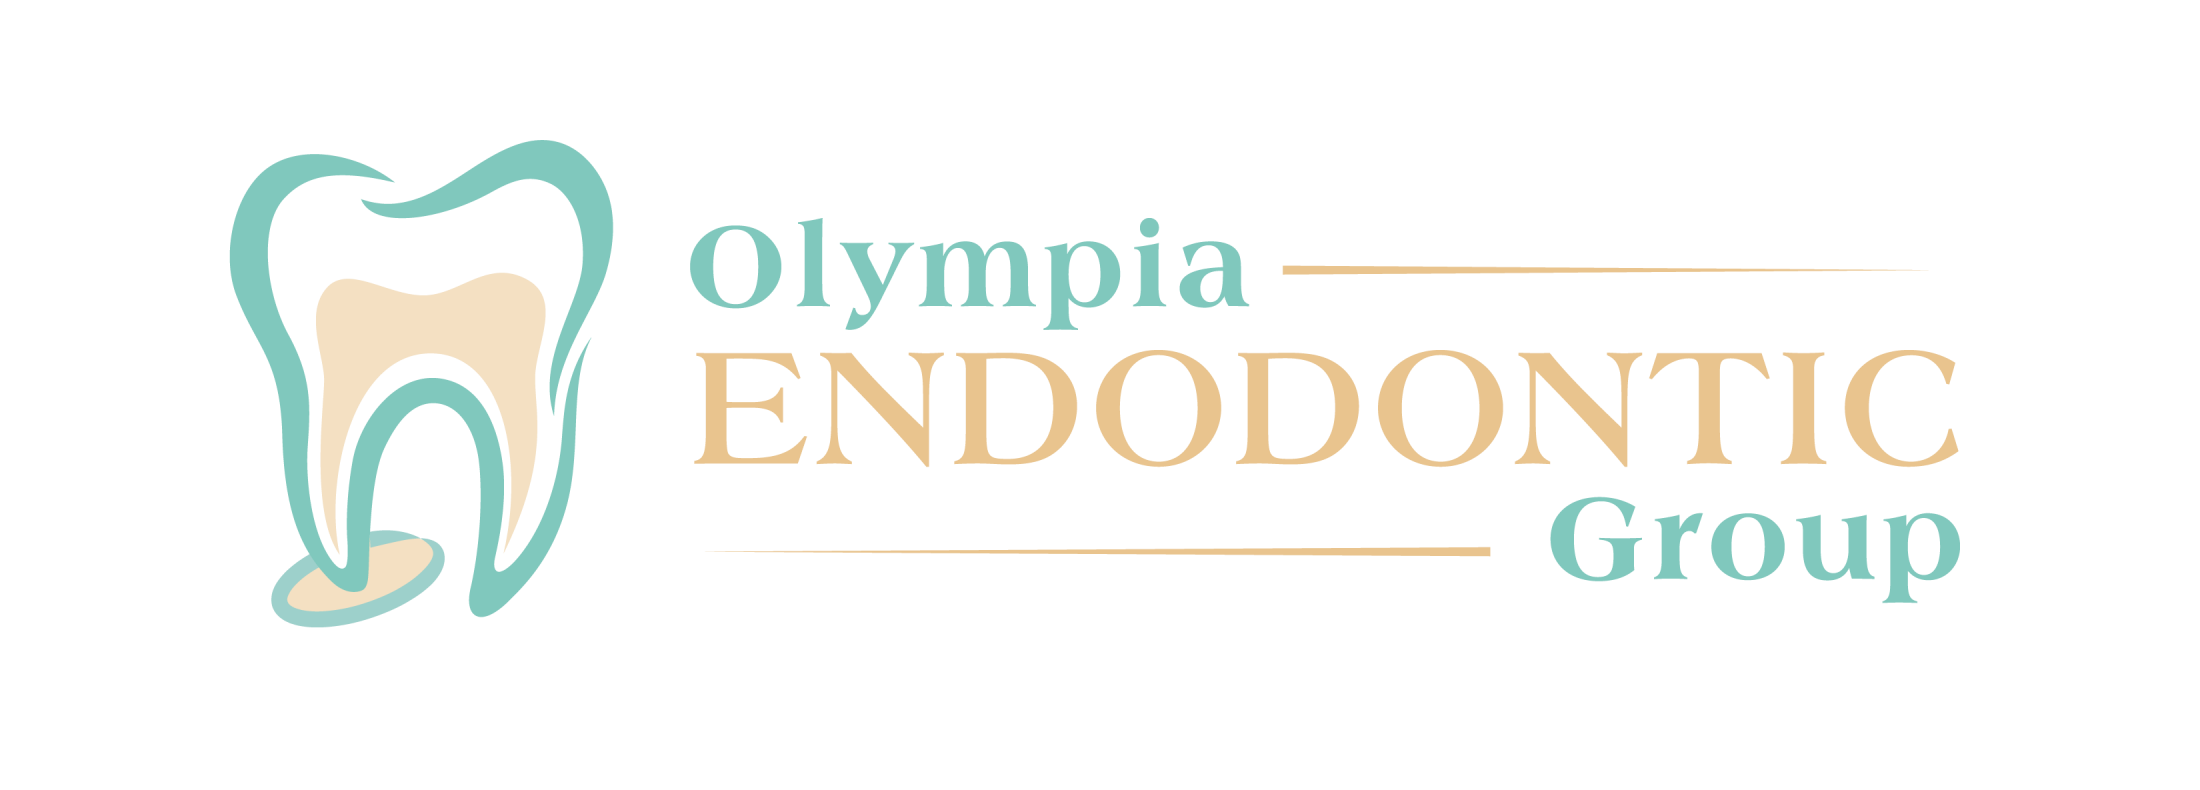 Link to Olympia Endodontic Group home page